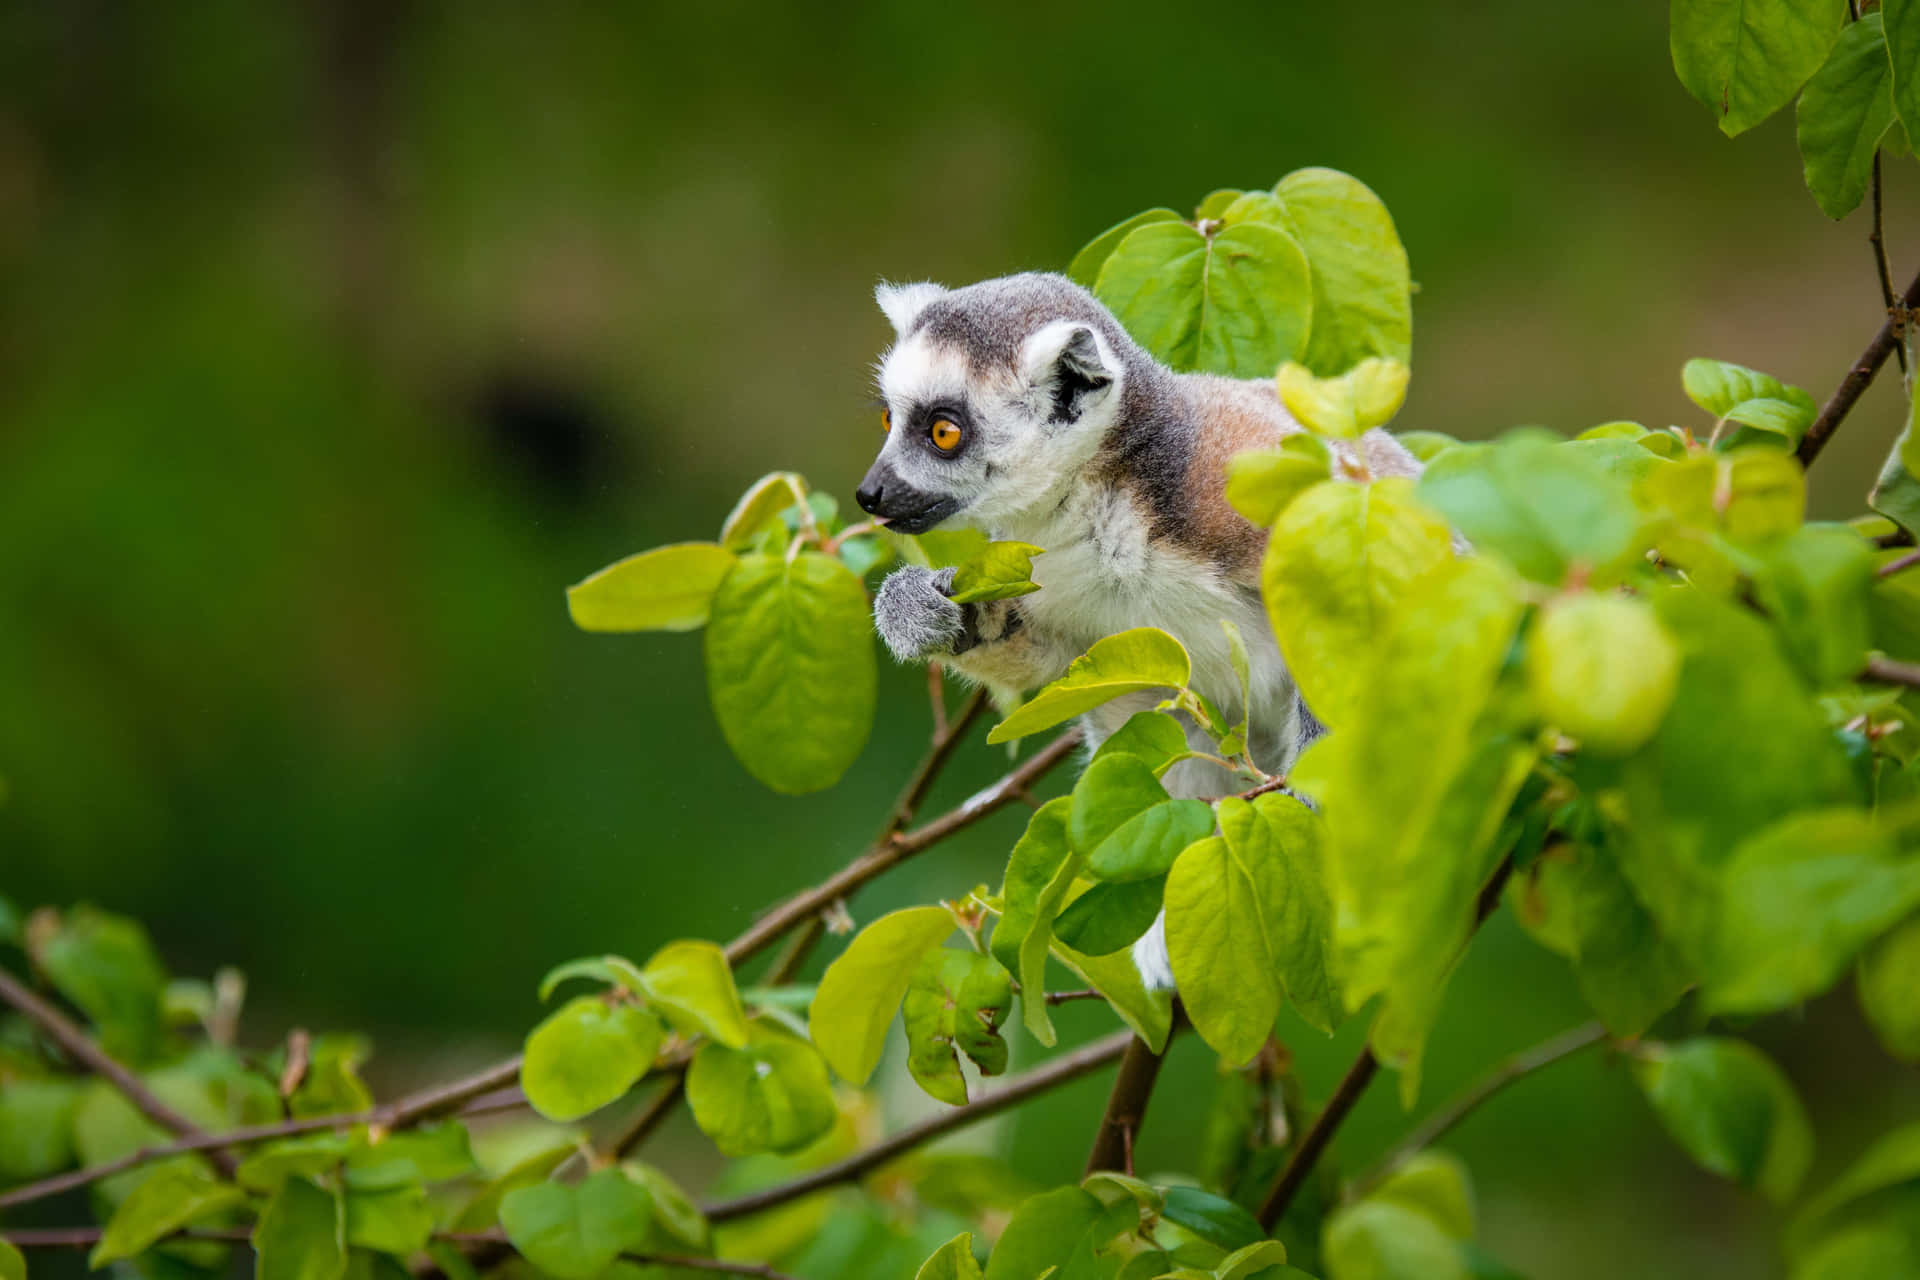 A vibrant Sugar Glider perched on a branch with colorful foliage